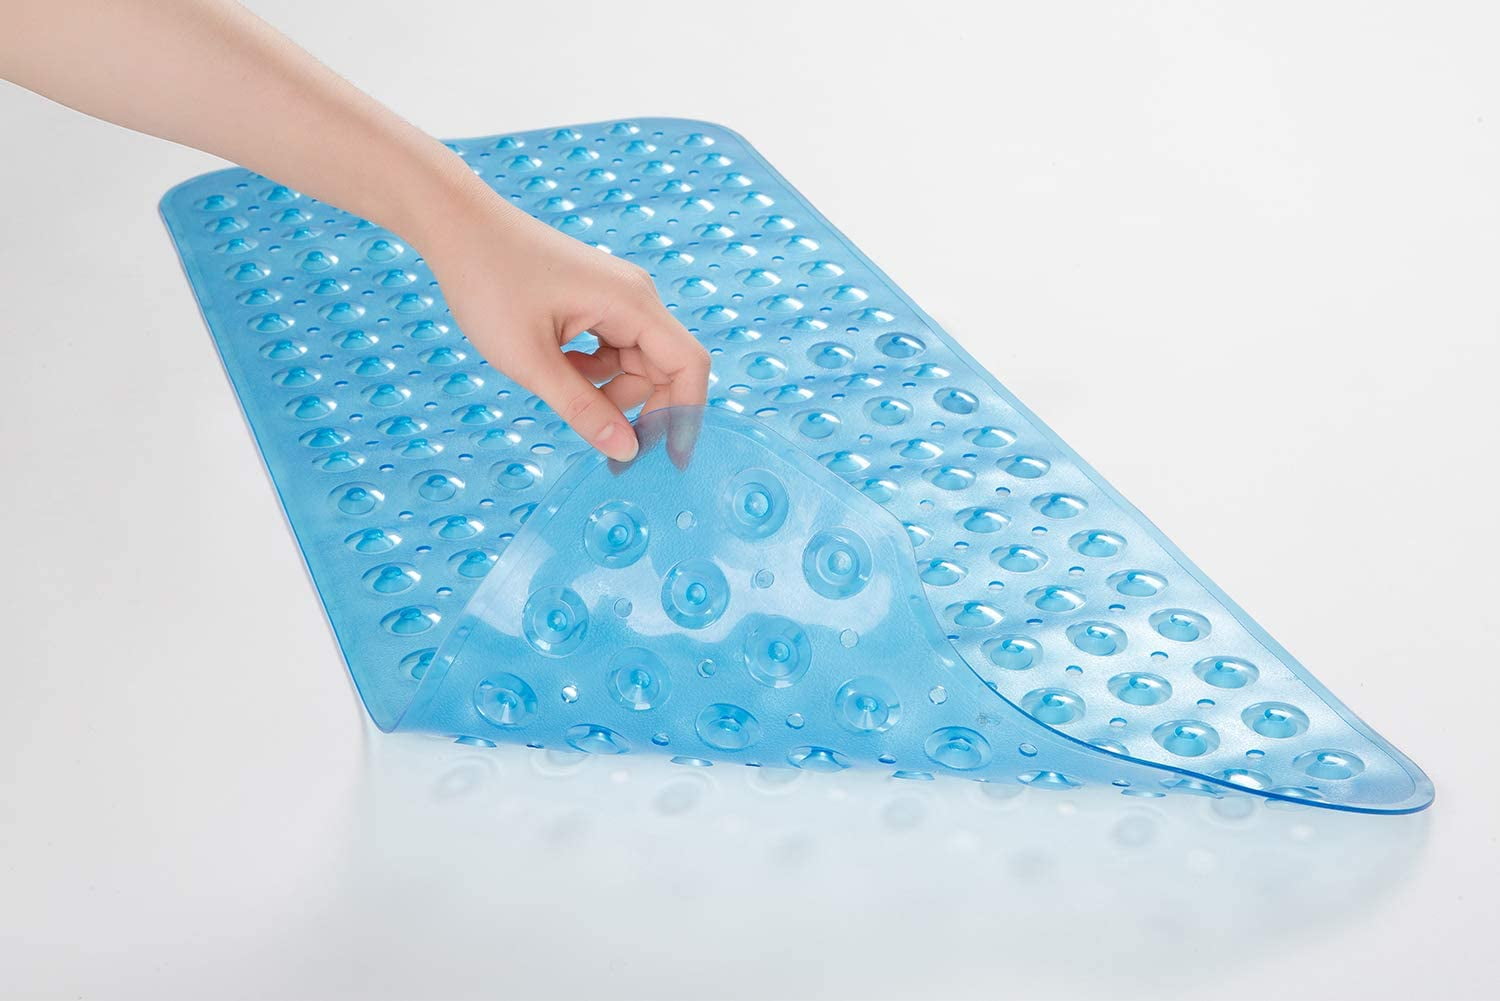  Non-slip Bathtub Mat Extra Long 40x16(for Smooth Non-Textured  Tubs Only), Machine Washable Bath Tub Shower Mat with Suction Cups for Bathroom  Bathtub Shower Stall : Home & Kitchen